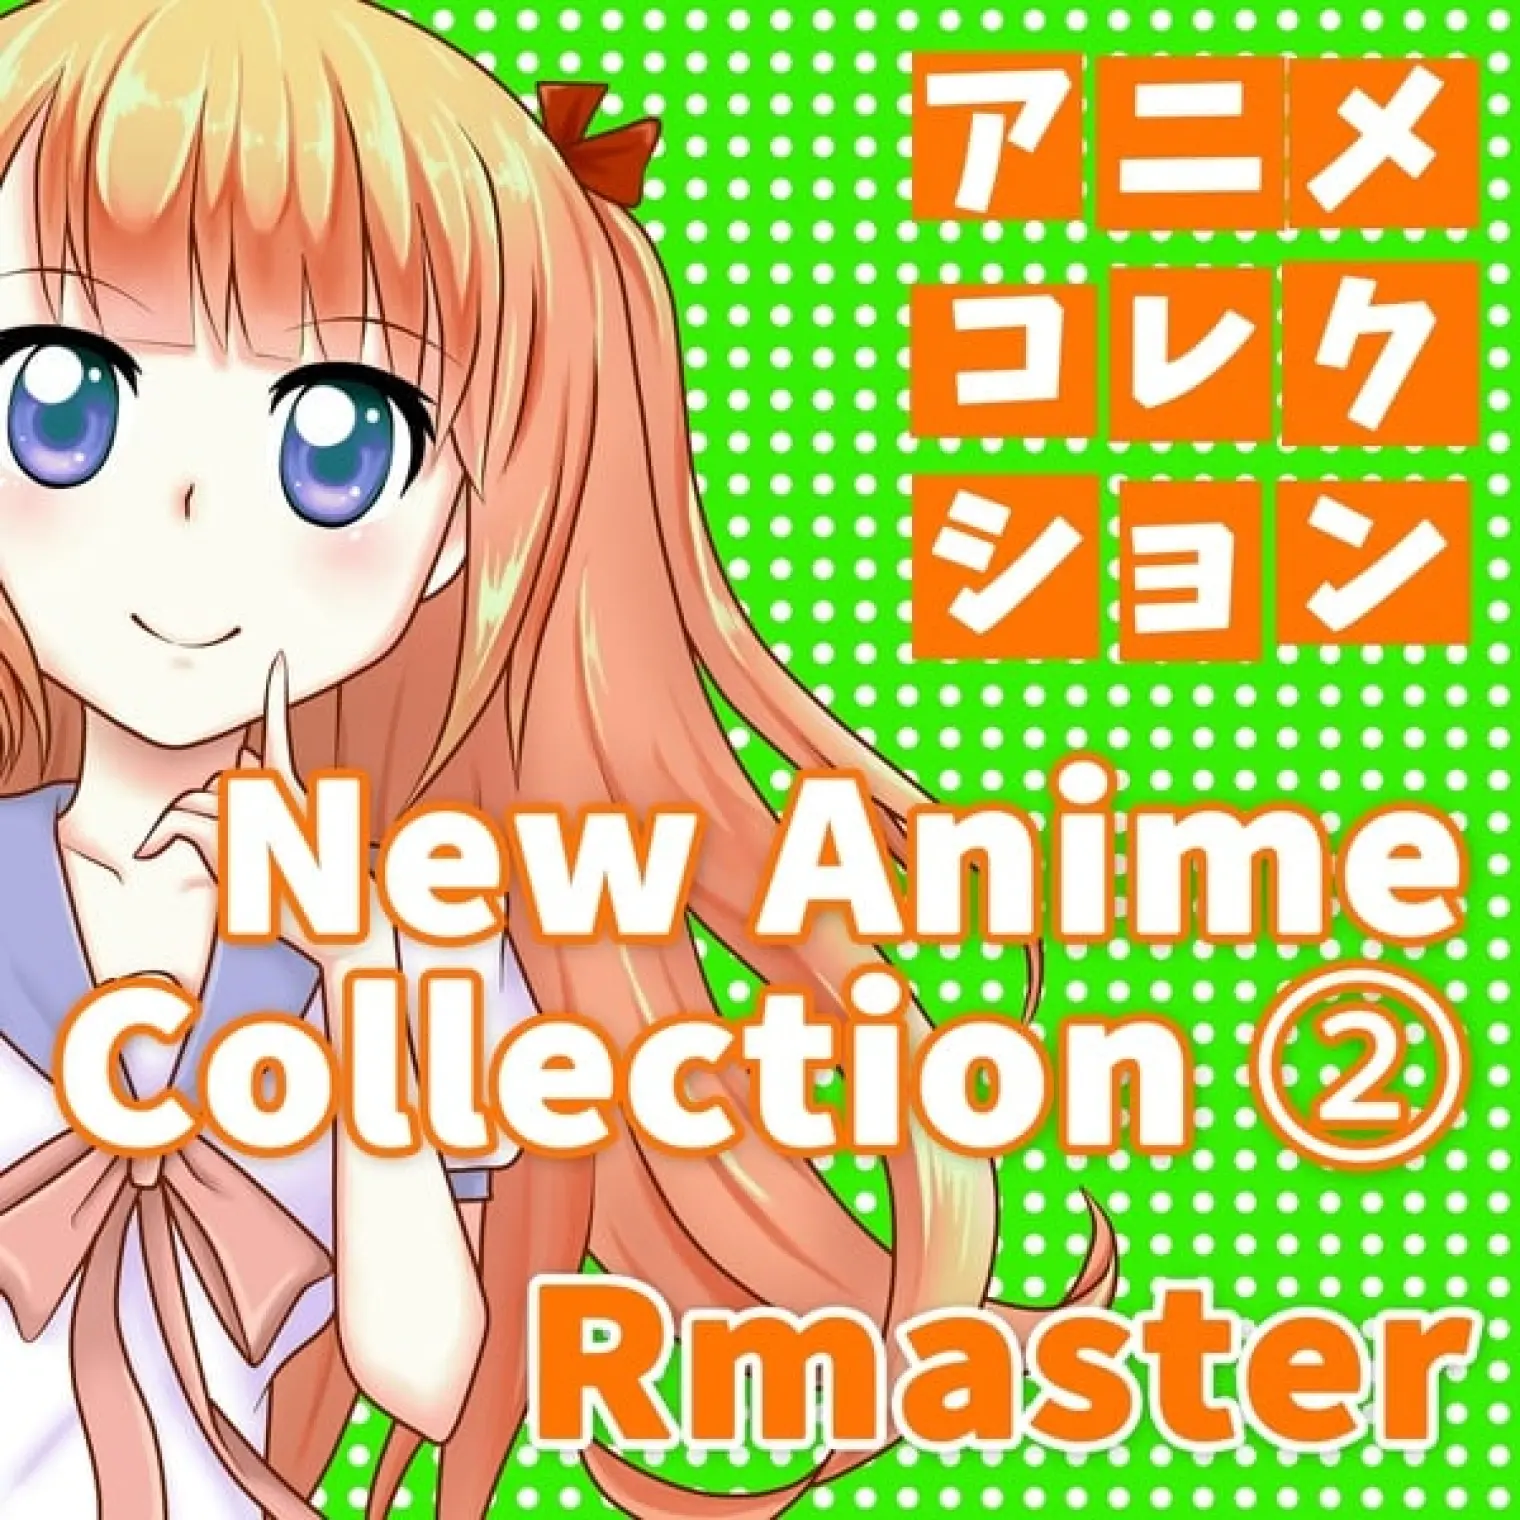 New Anime Collection, Vol. 2 (Songs from "Naruto") -  RMaster 